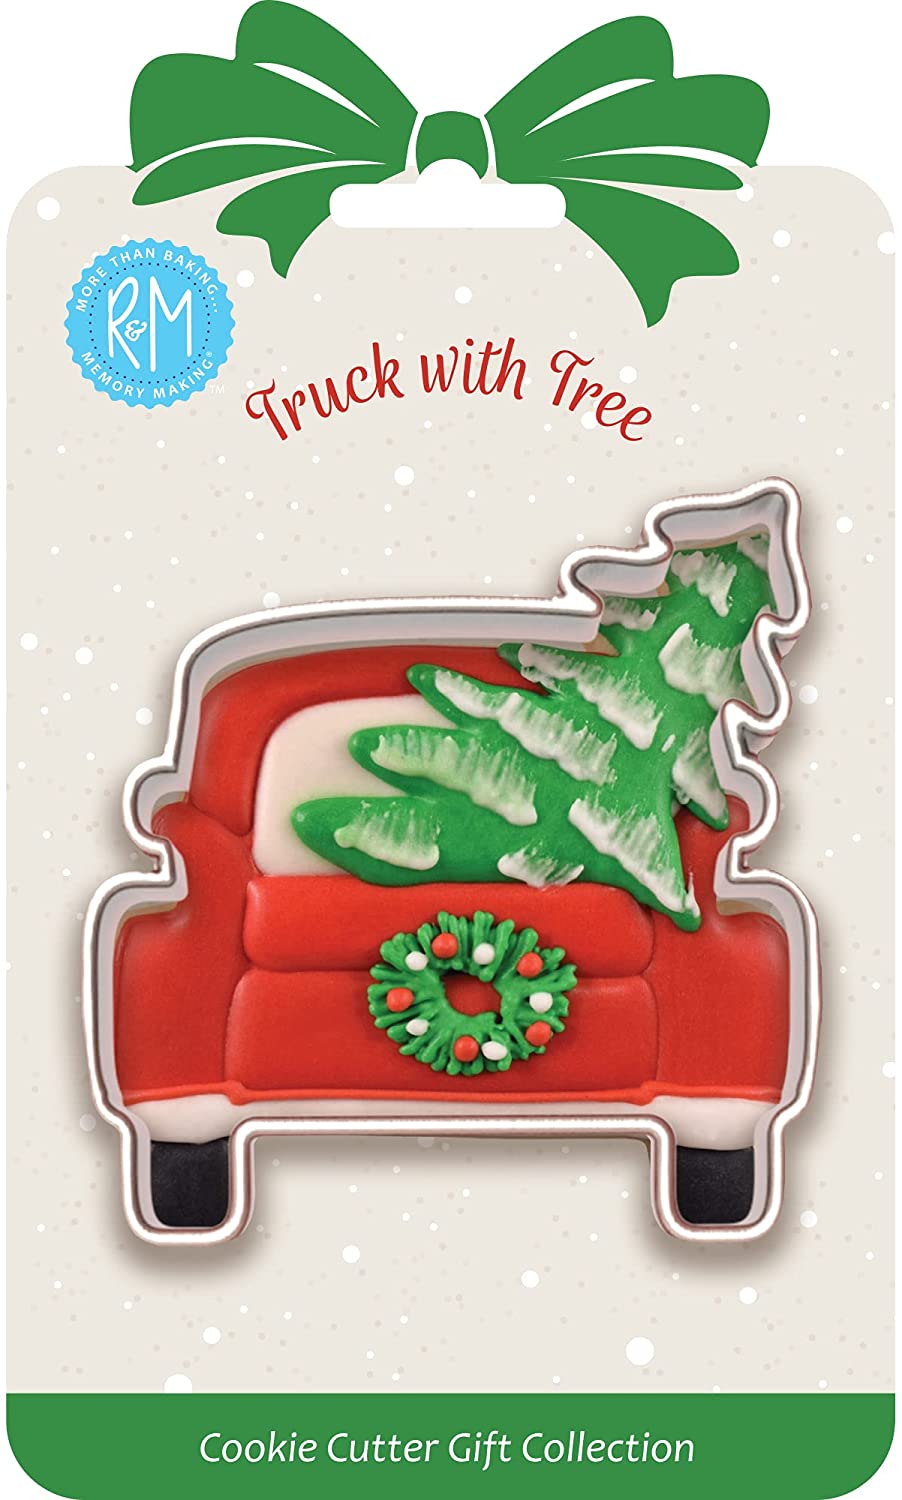 truck with tree in back shaped metal cookie cutter on card packaging.